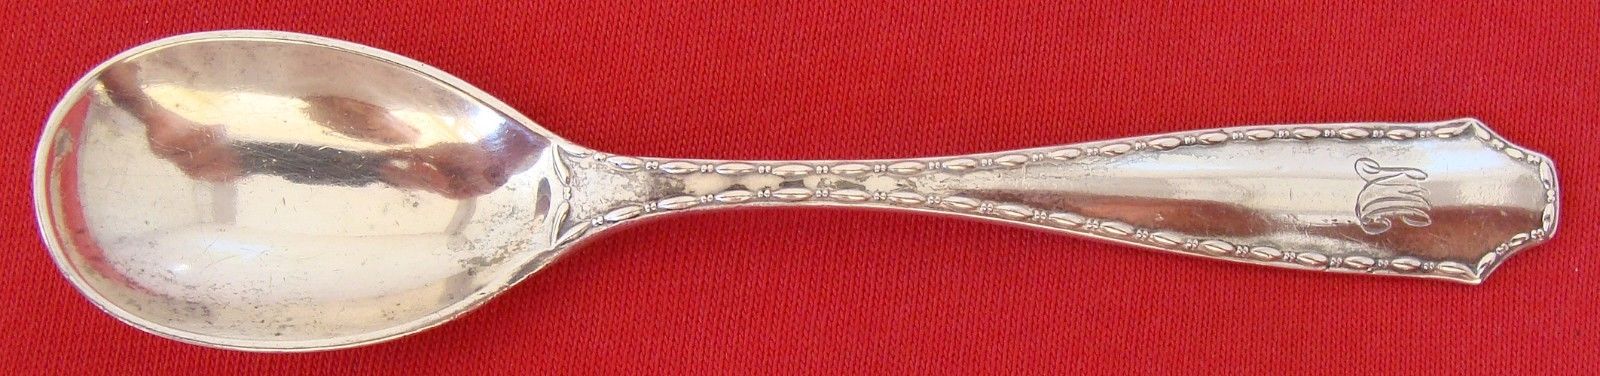 RARE Tiffany MARQUISE Sterling Silver 4 5/8" EGG SPOON